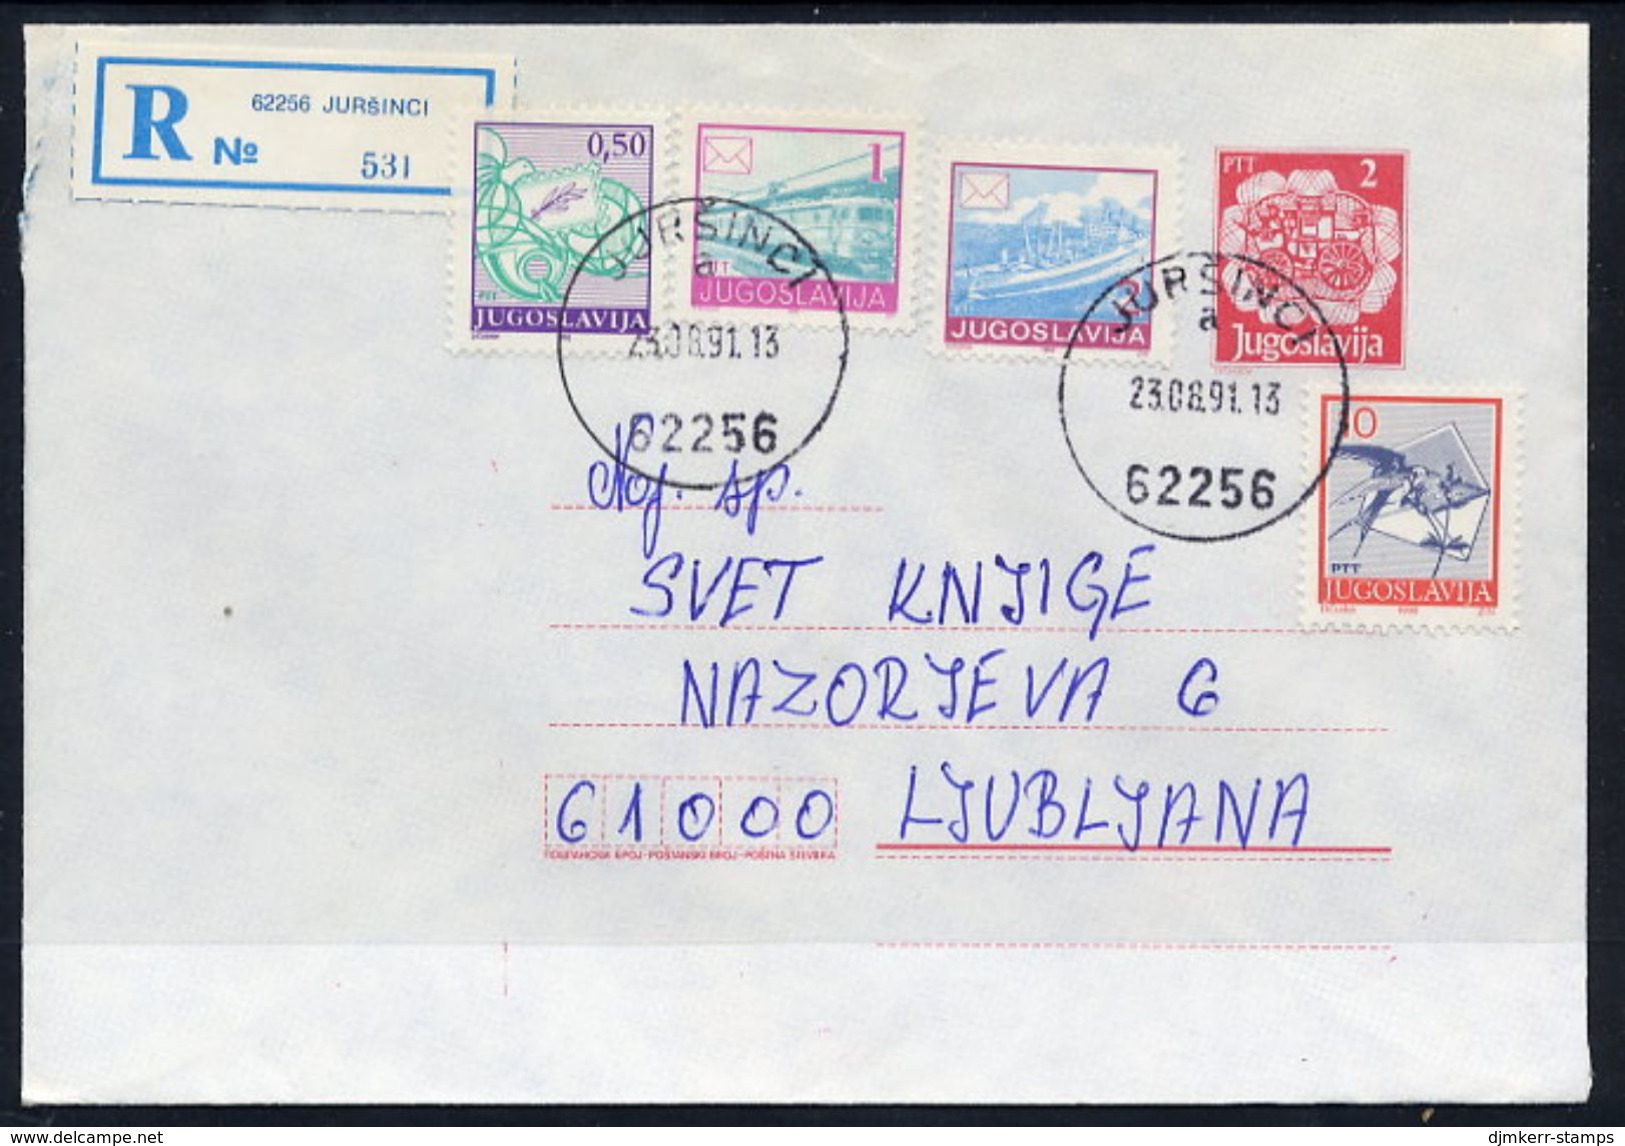 YUGOSLAVIA 1990 Mailcoach 2 D. Stationery Envelope Used With Additional Franking.  Michel U96 - Entiers Postaux